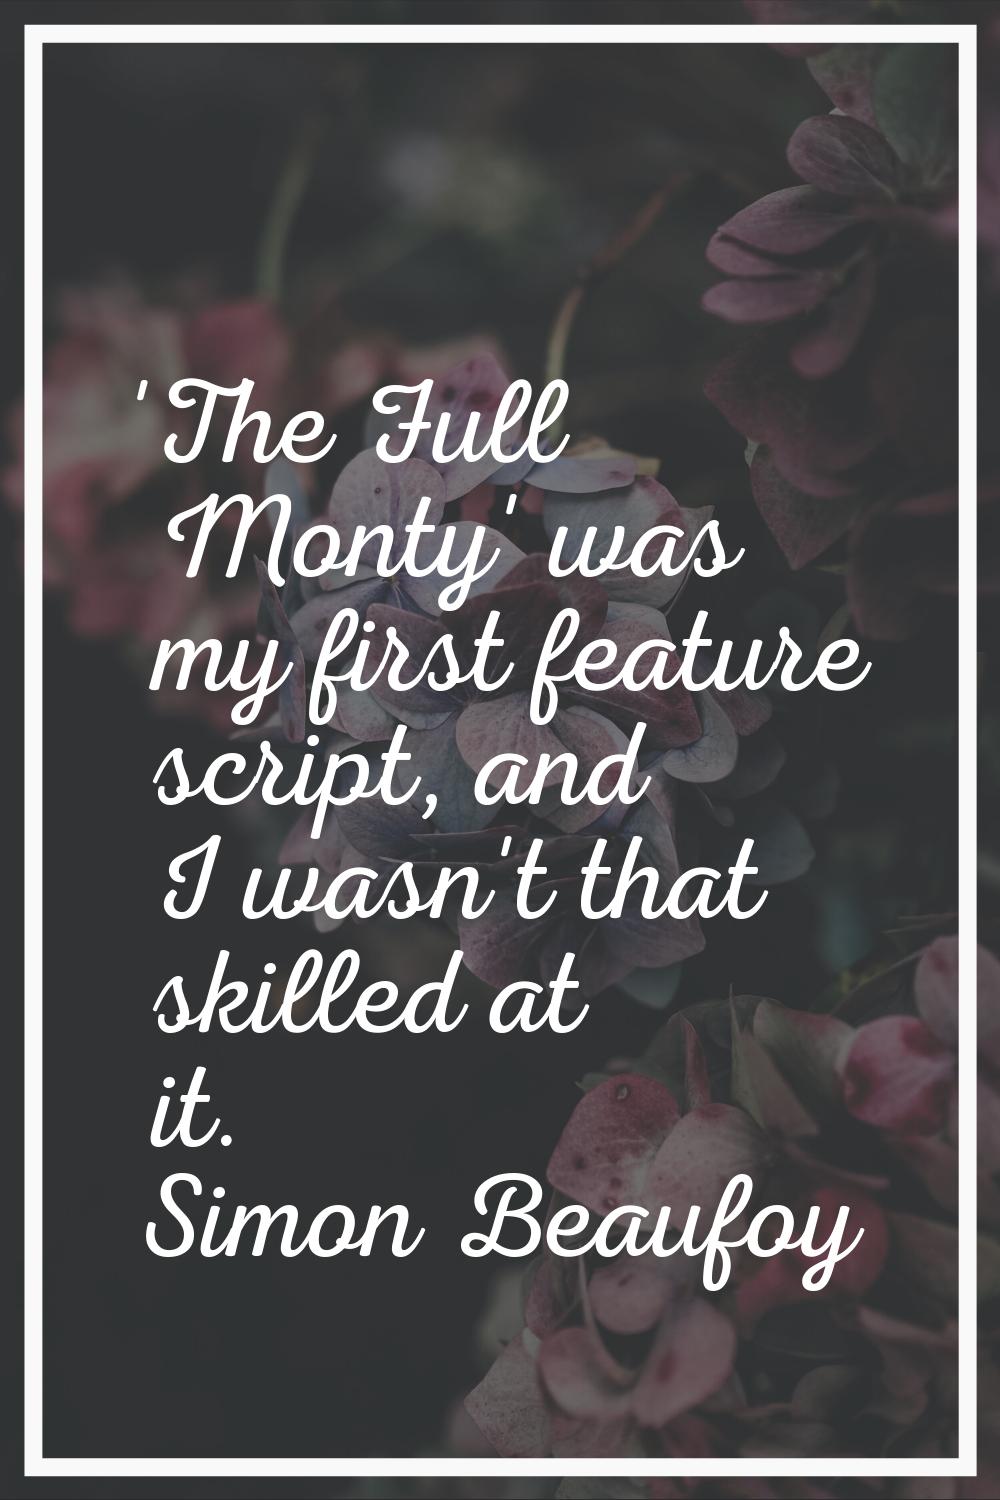 'The Full Monty' was my first feature script, and I wasn't that skilled at it.